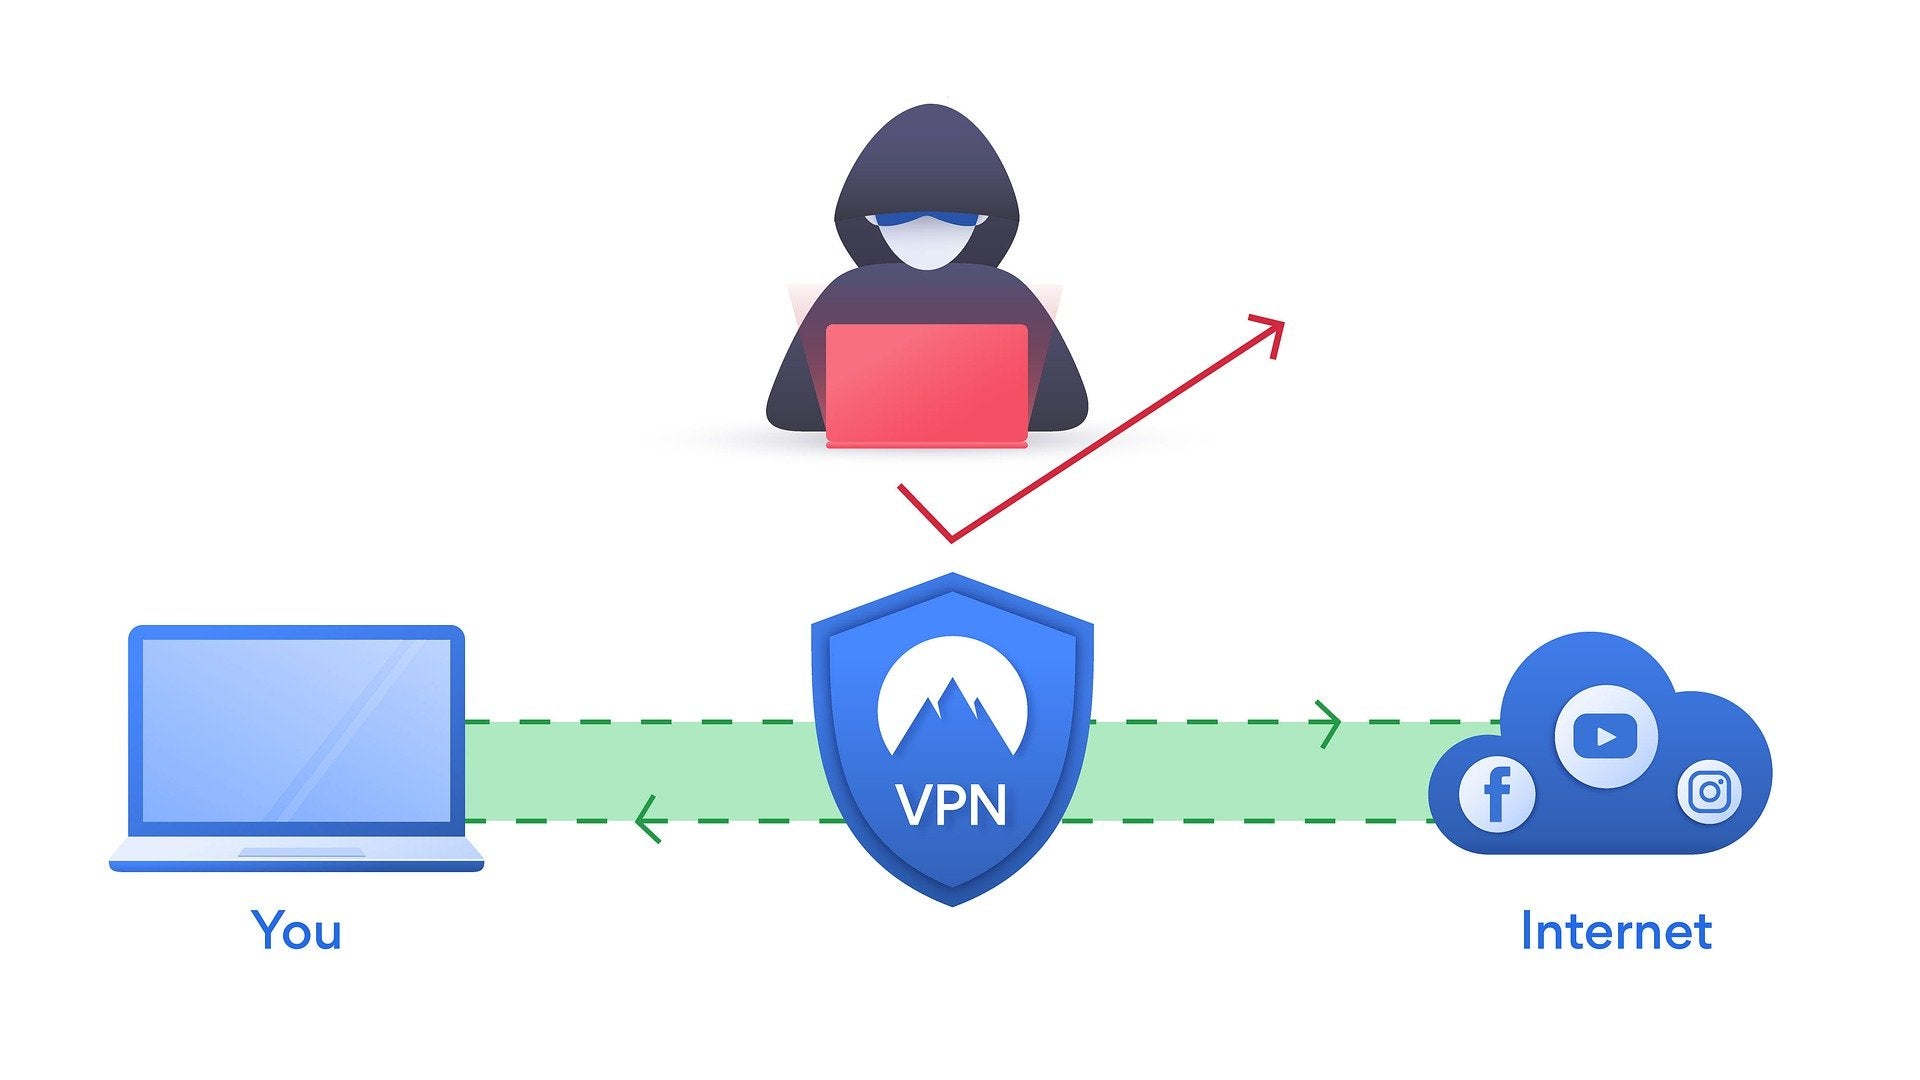 A VPN establishes a private, secure connection that only certain users can access.